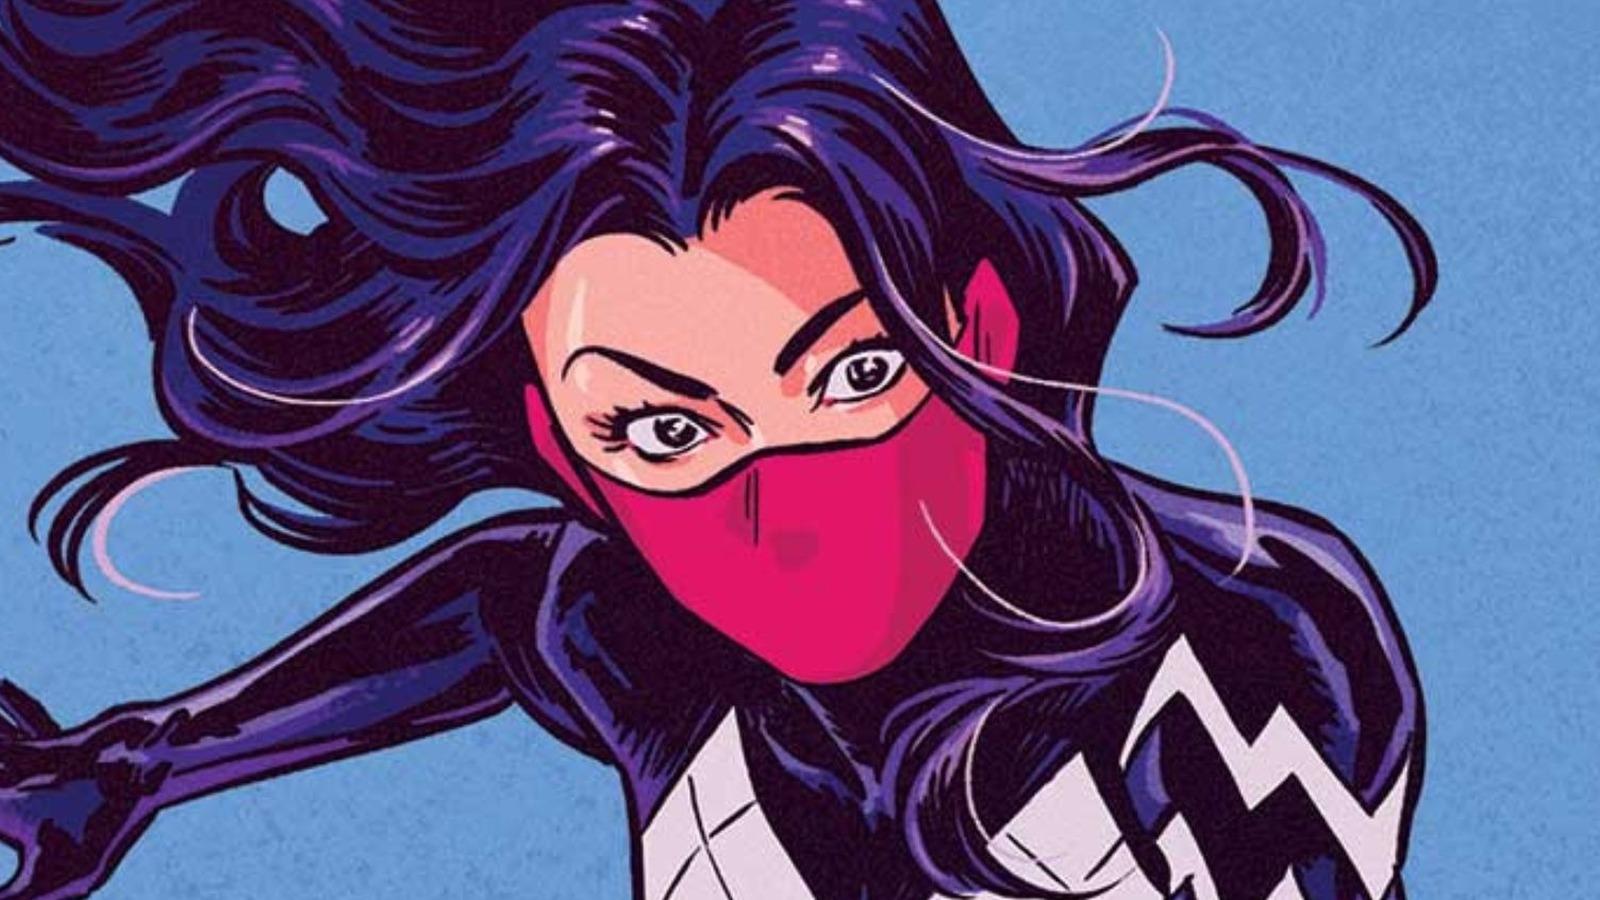 Amazon Gets Into The Marvel Series Game With Silk Spider Society More Marvel Sony Series To Come